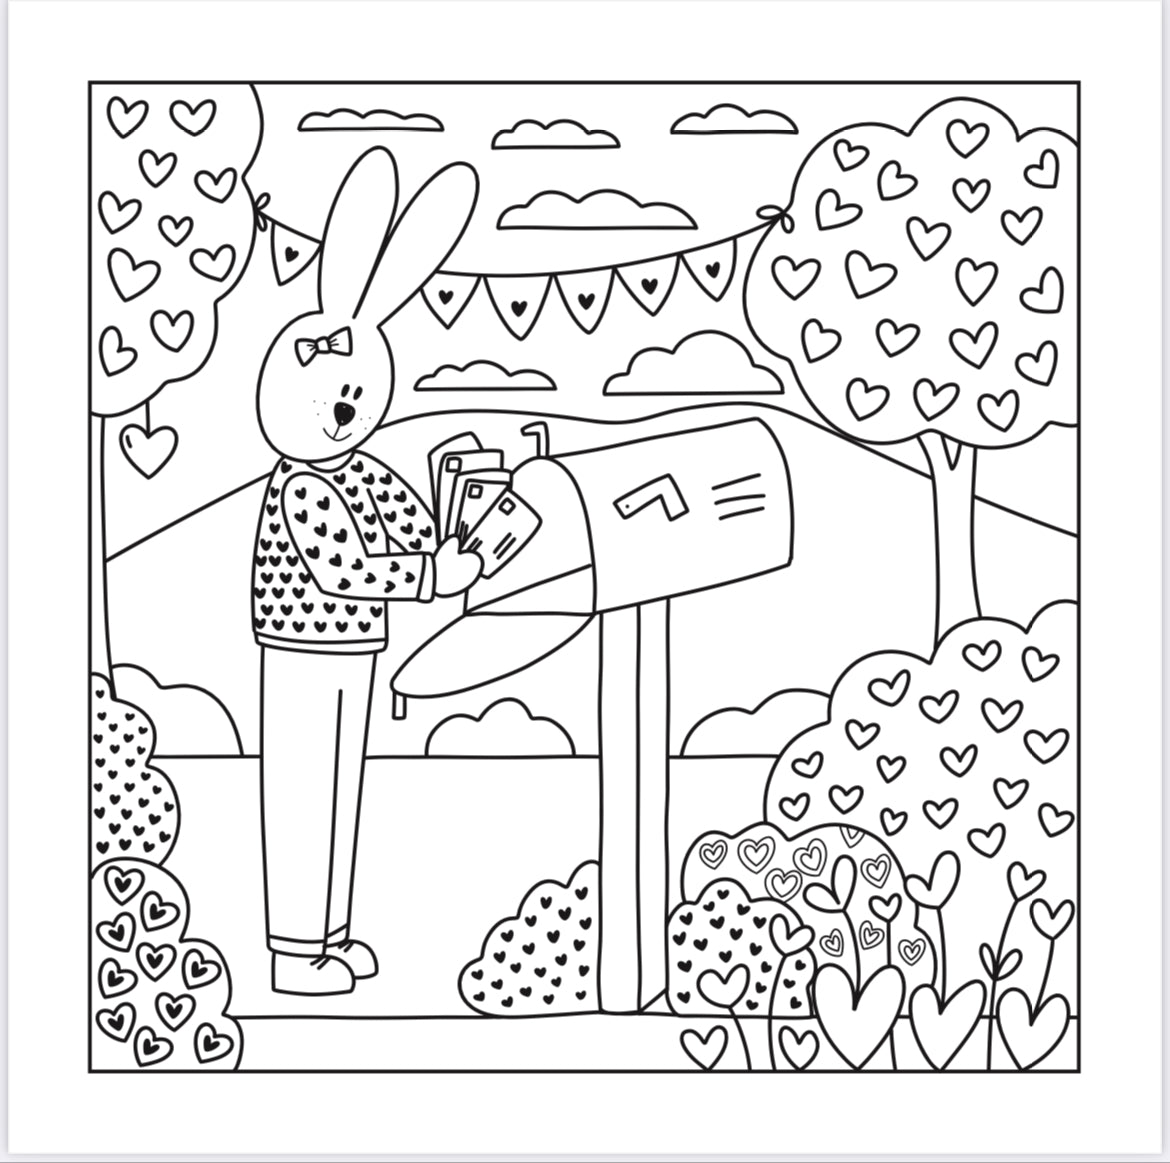 Free Coloring Pages “The Dogwoods Valentine” Coloring Book